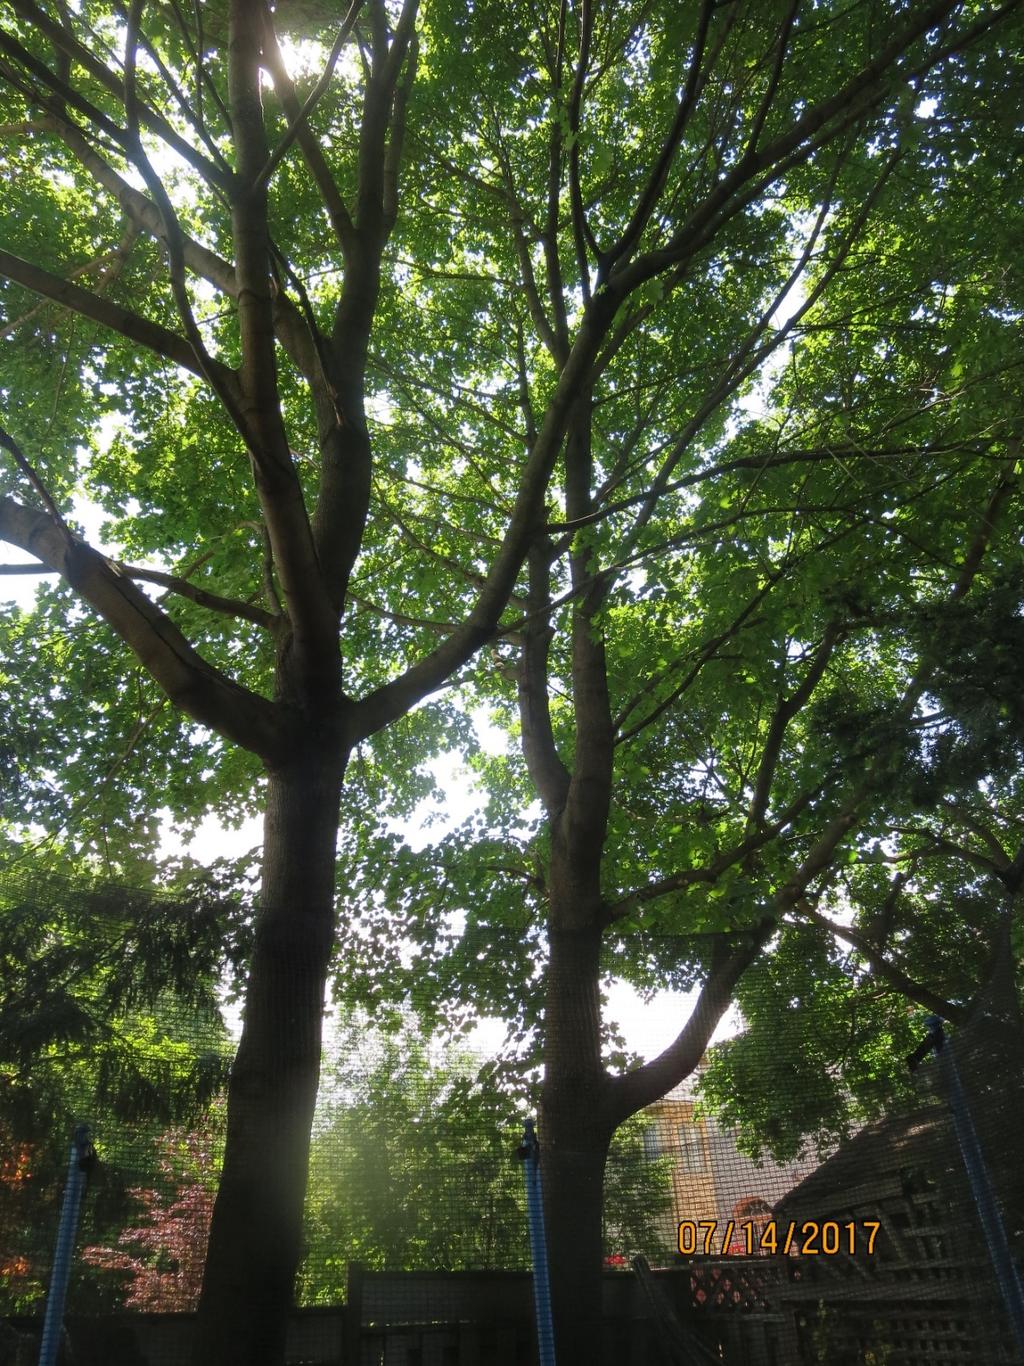 Attachment 1- Photograph of the Norway maple tree, located on the right, measuring 42